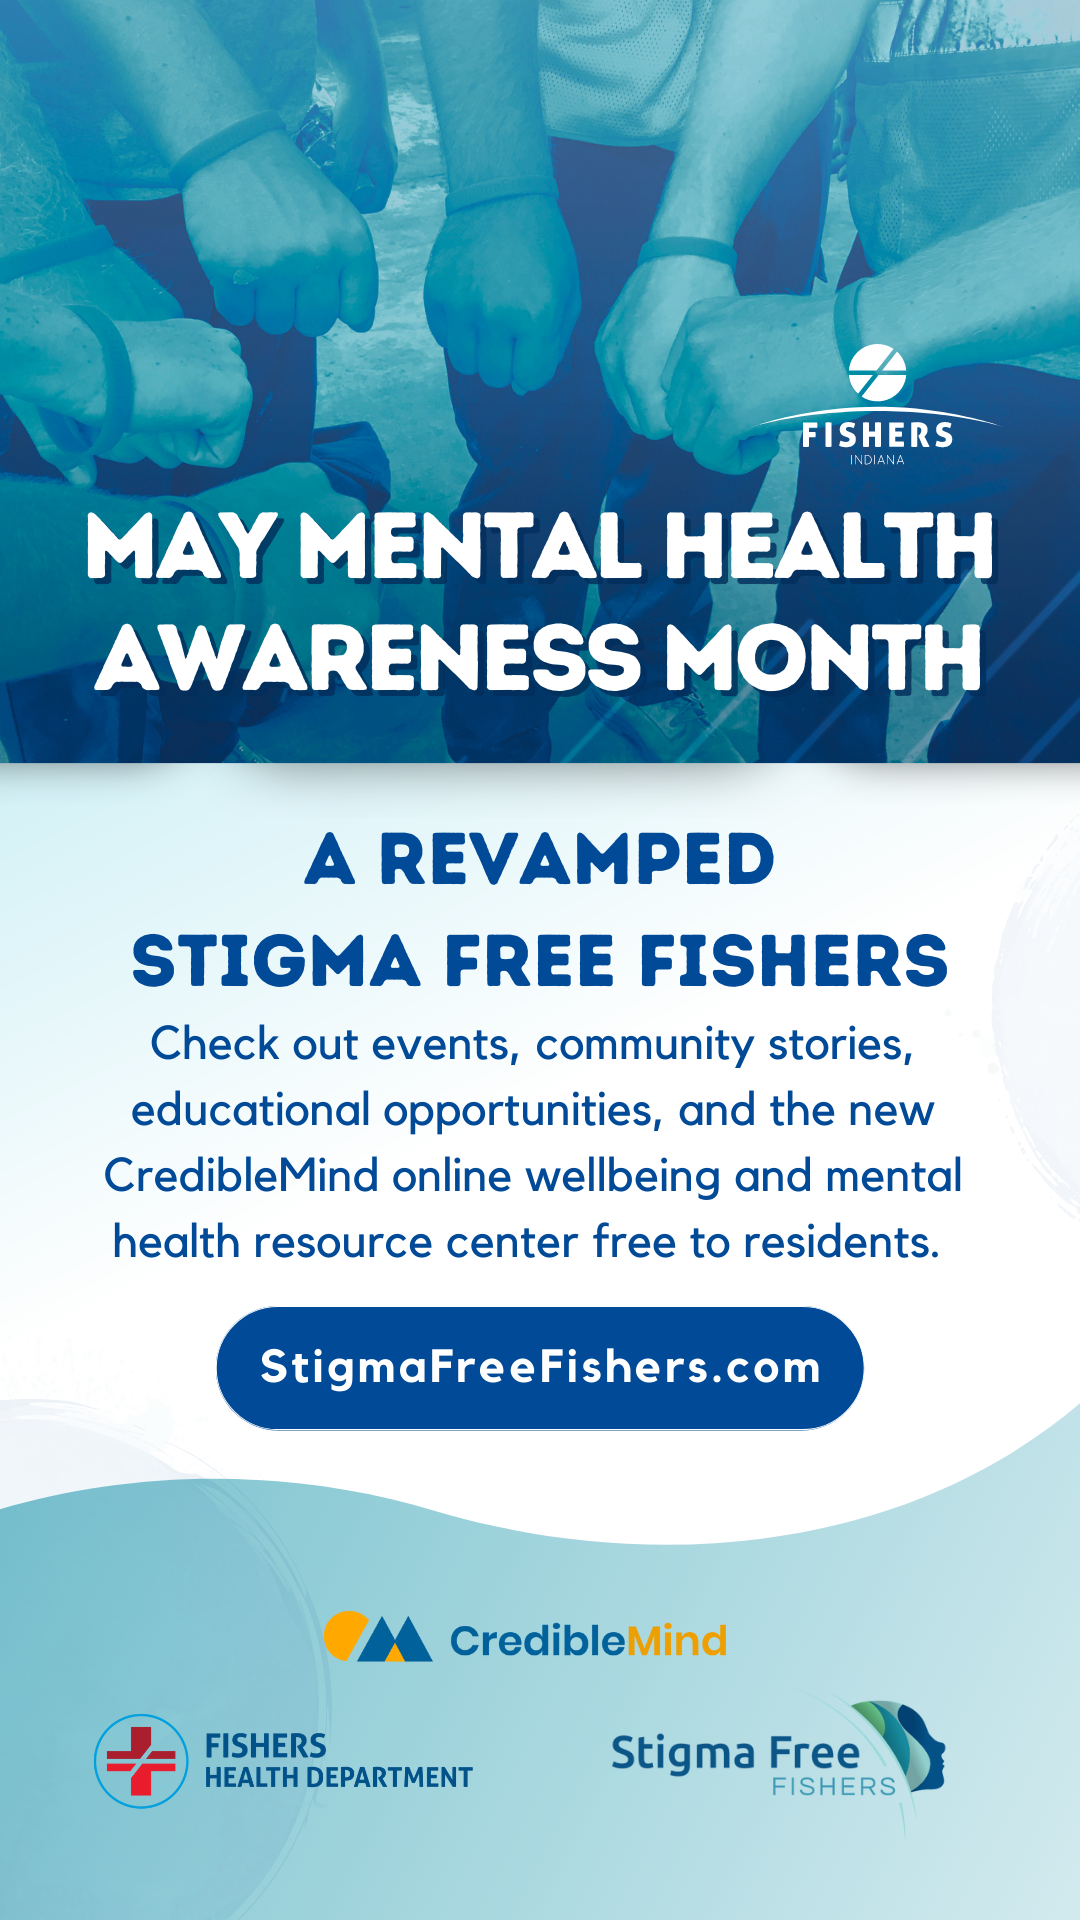 May Mental Health Awareness Month, a revamped<br />
stigma free fishers, Check out events, community stories, educational opportunities, and the new CredibleMind online wellbeing and mental health resource center free to residents. stigmafreefishers.com